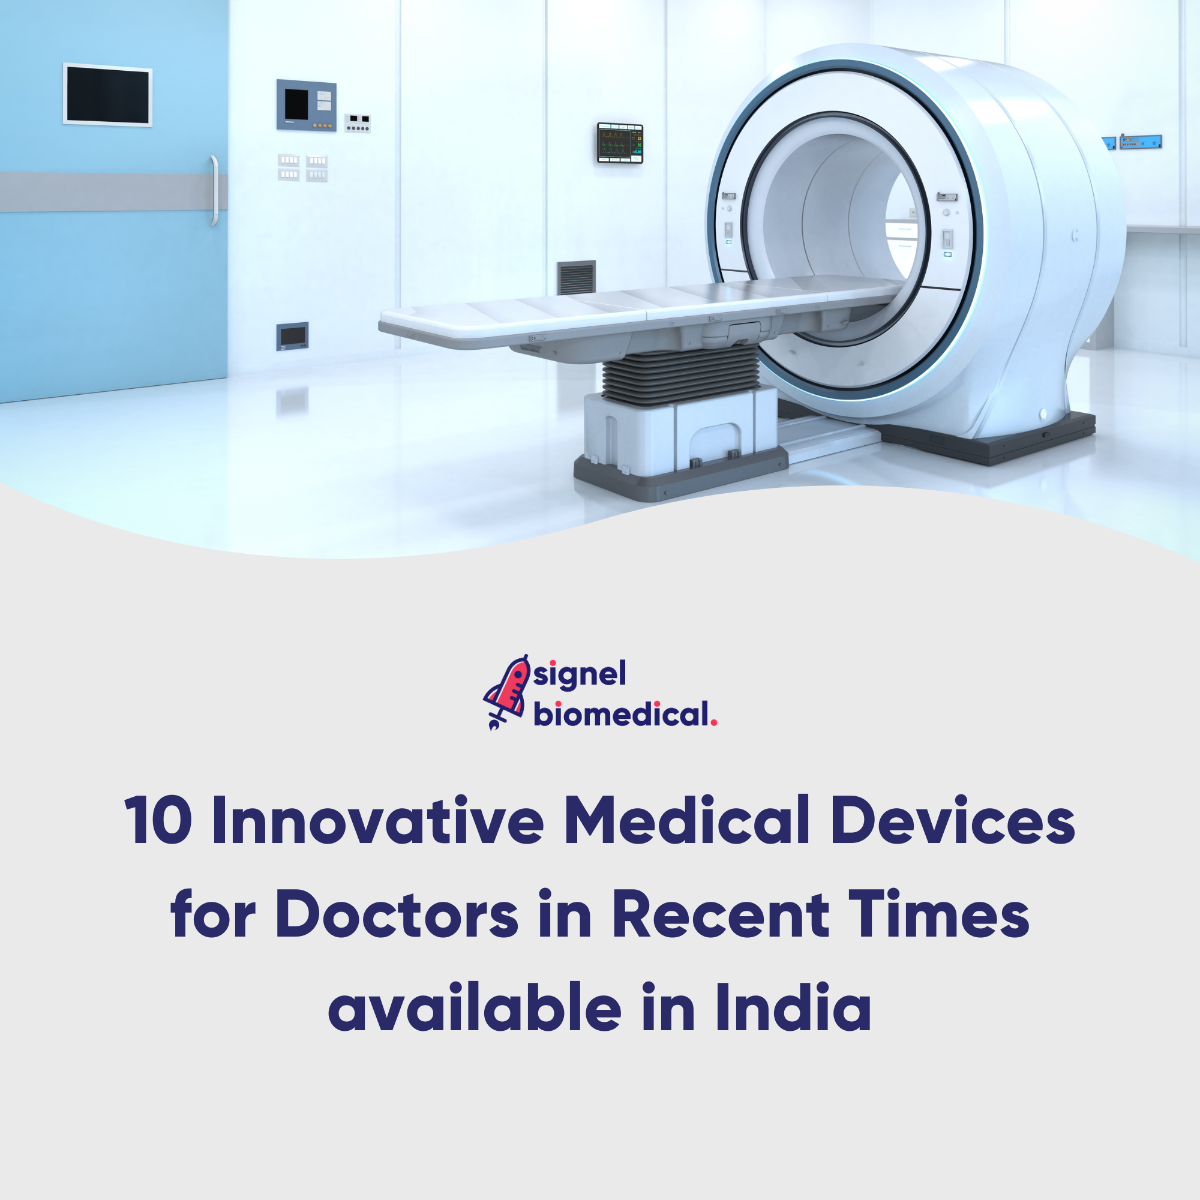 10 Innovative Medical Devices